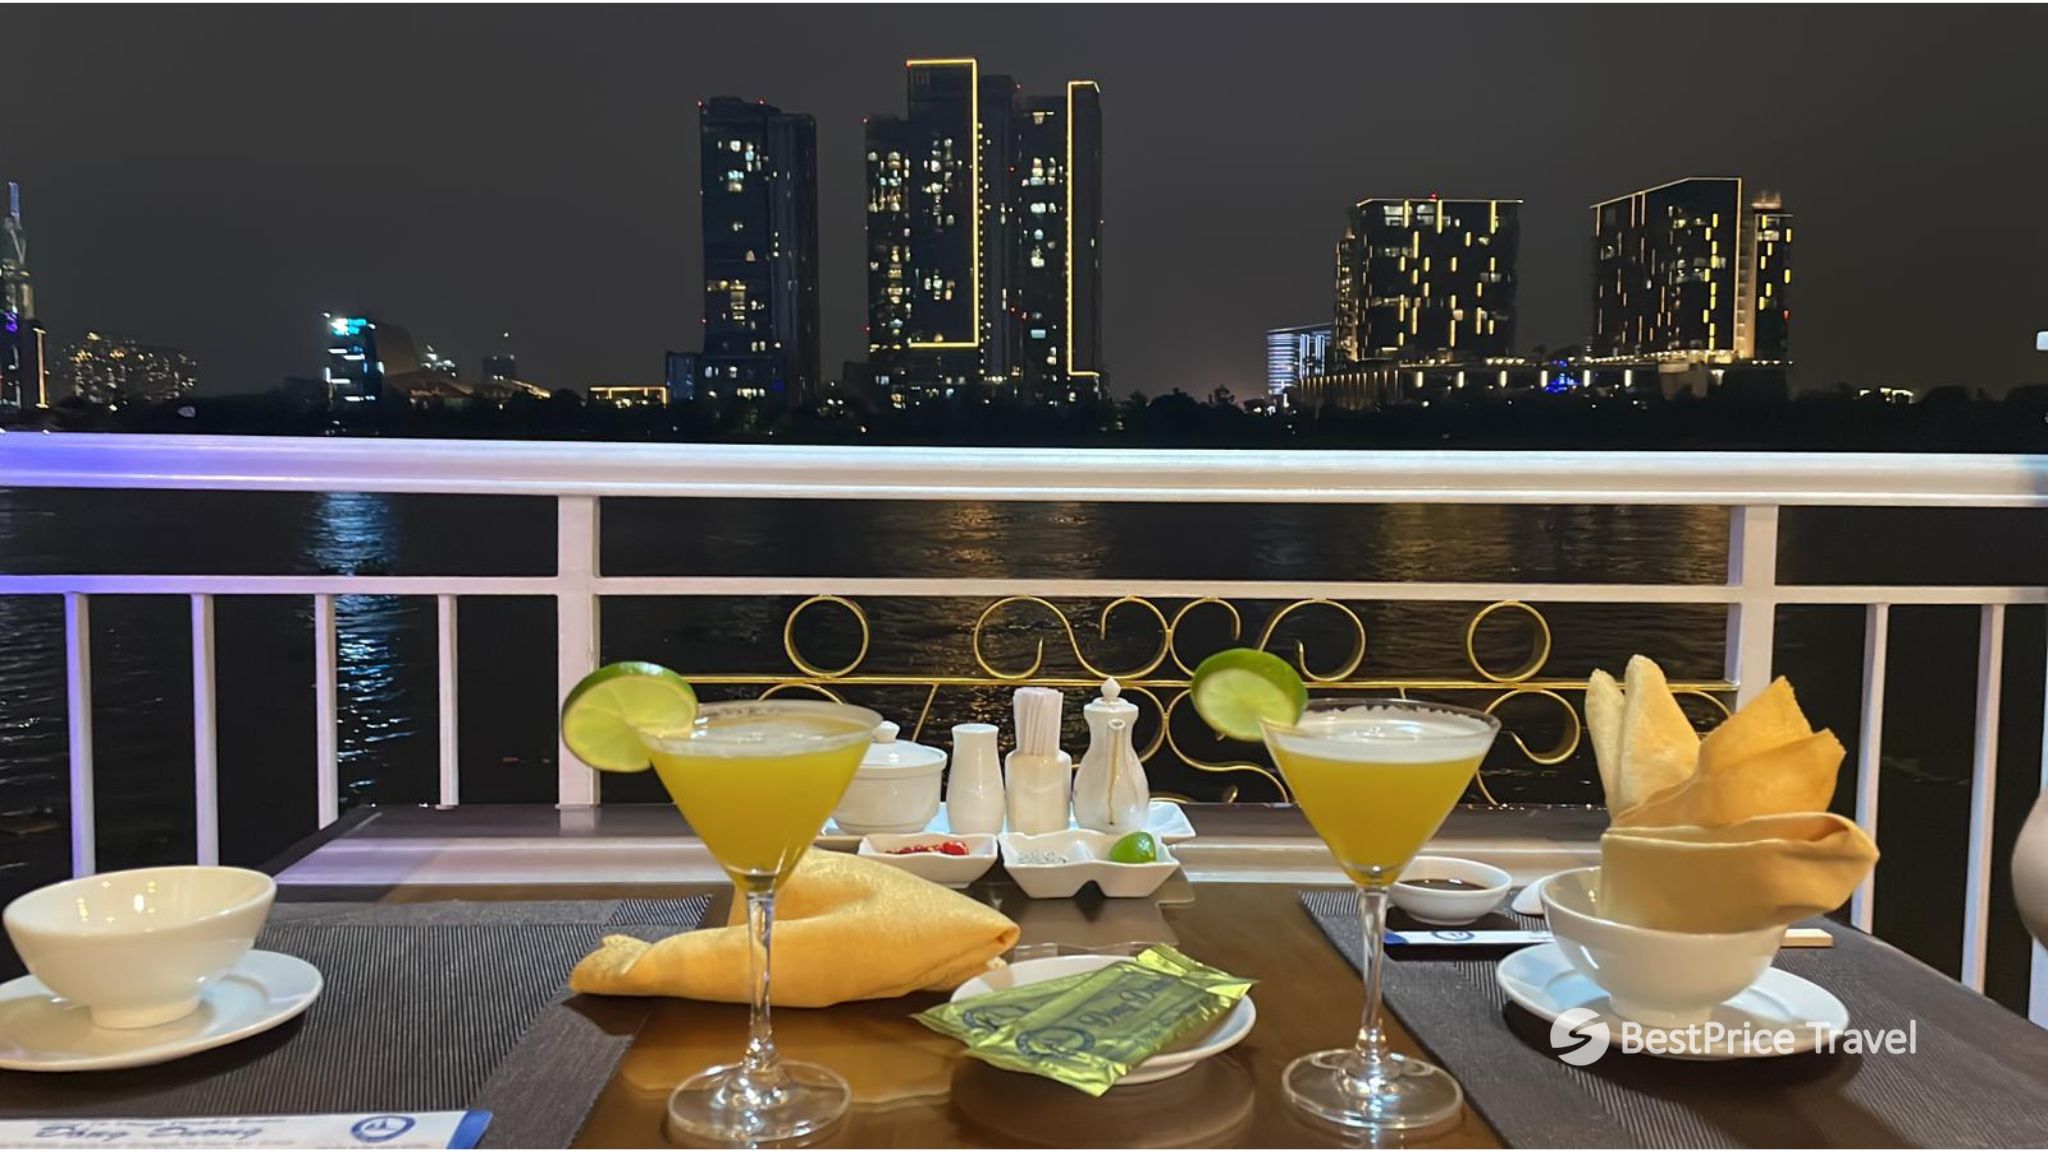 Day 1 Have A Luxury Dinner While Cruising On Saigon River